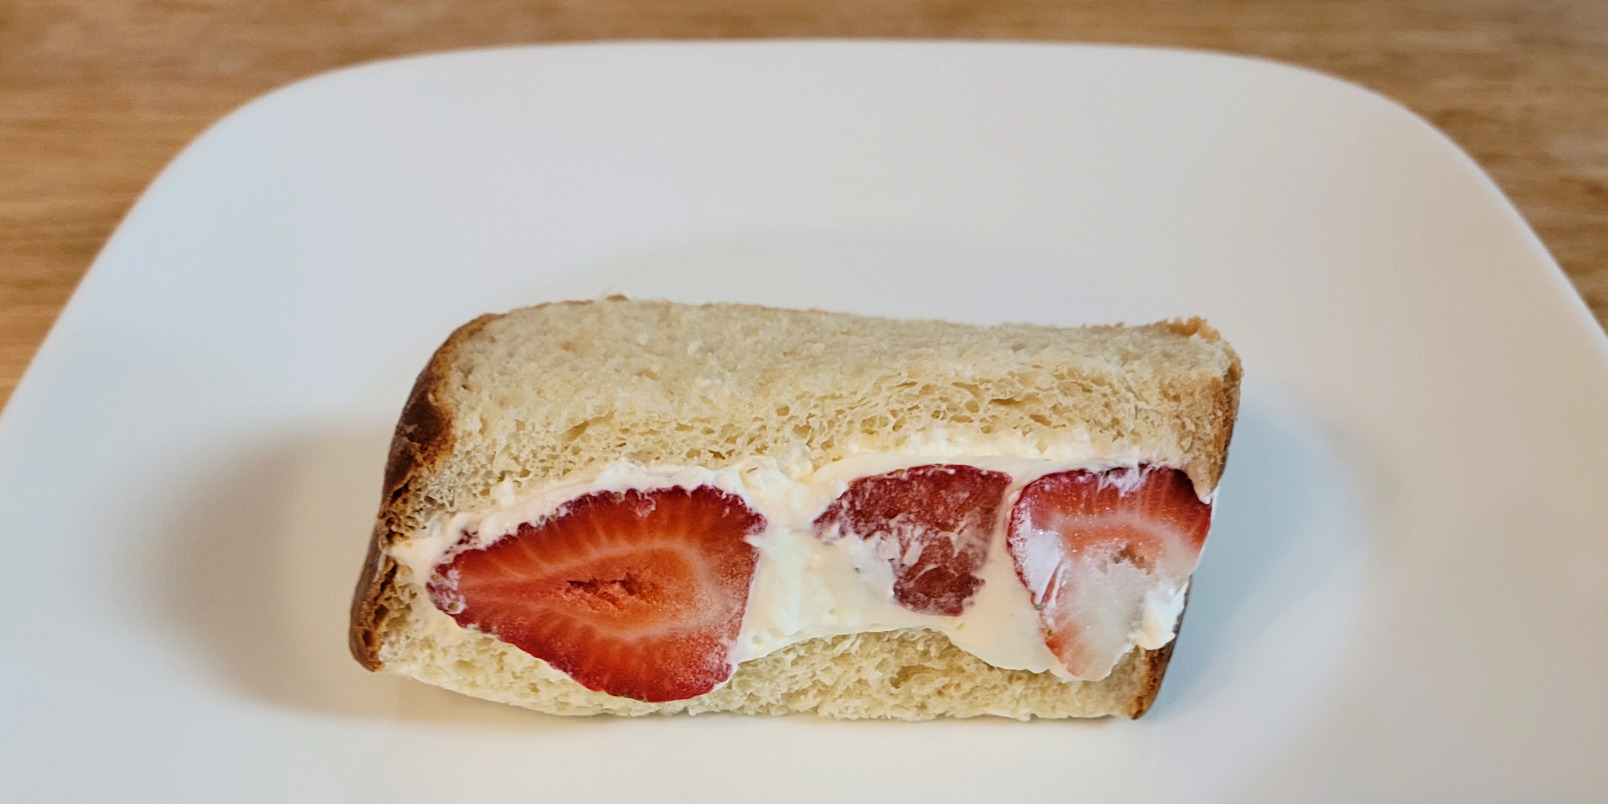 A fruit sandwich with whipped cream and strawberries between homemade bread by Kaori's Oven